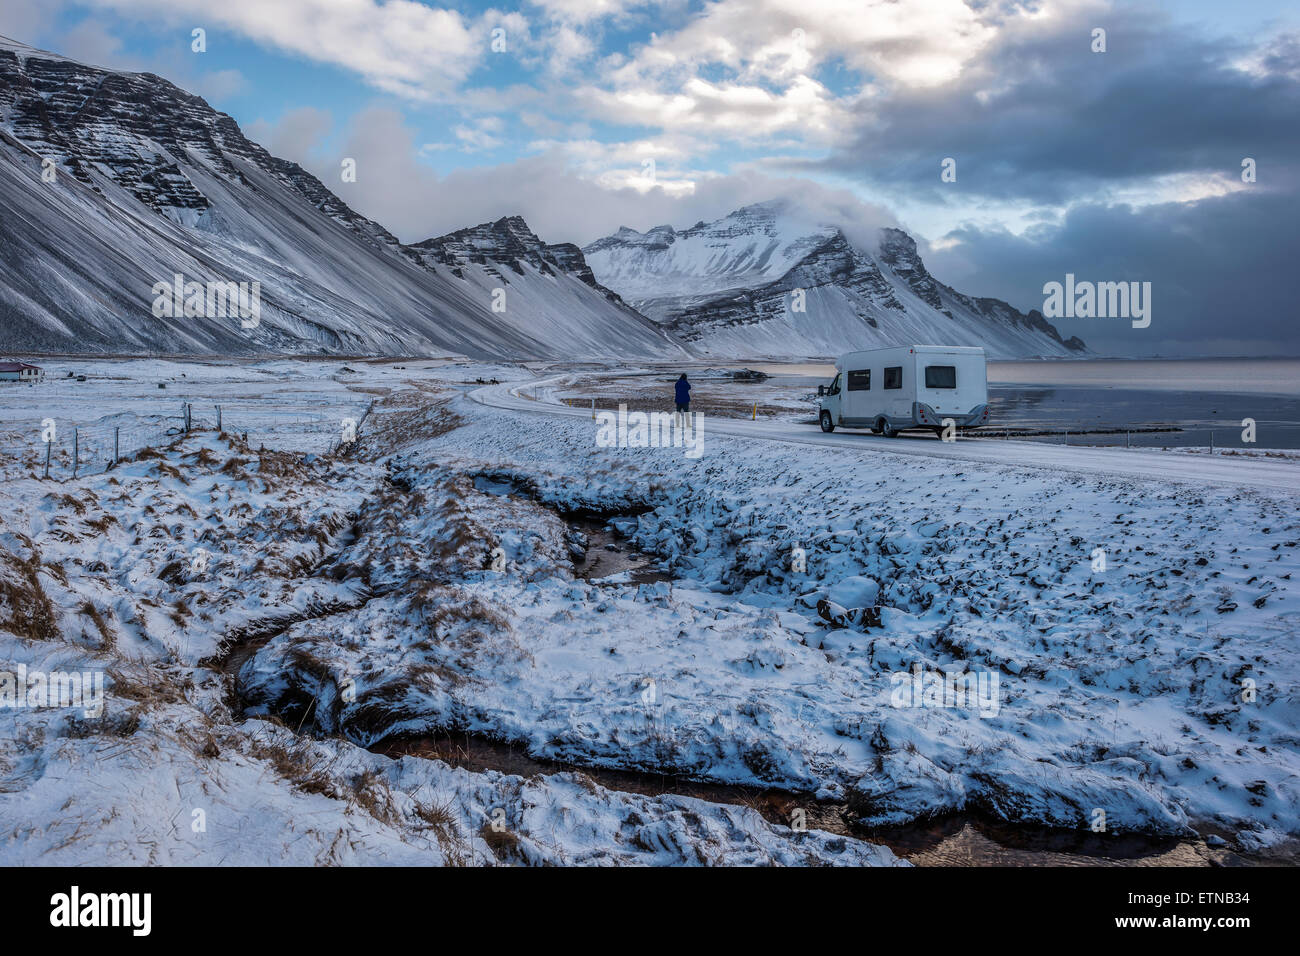 Person standing by a campervan, Vestrahorn mountain, Iceland Stock Photo